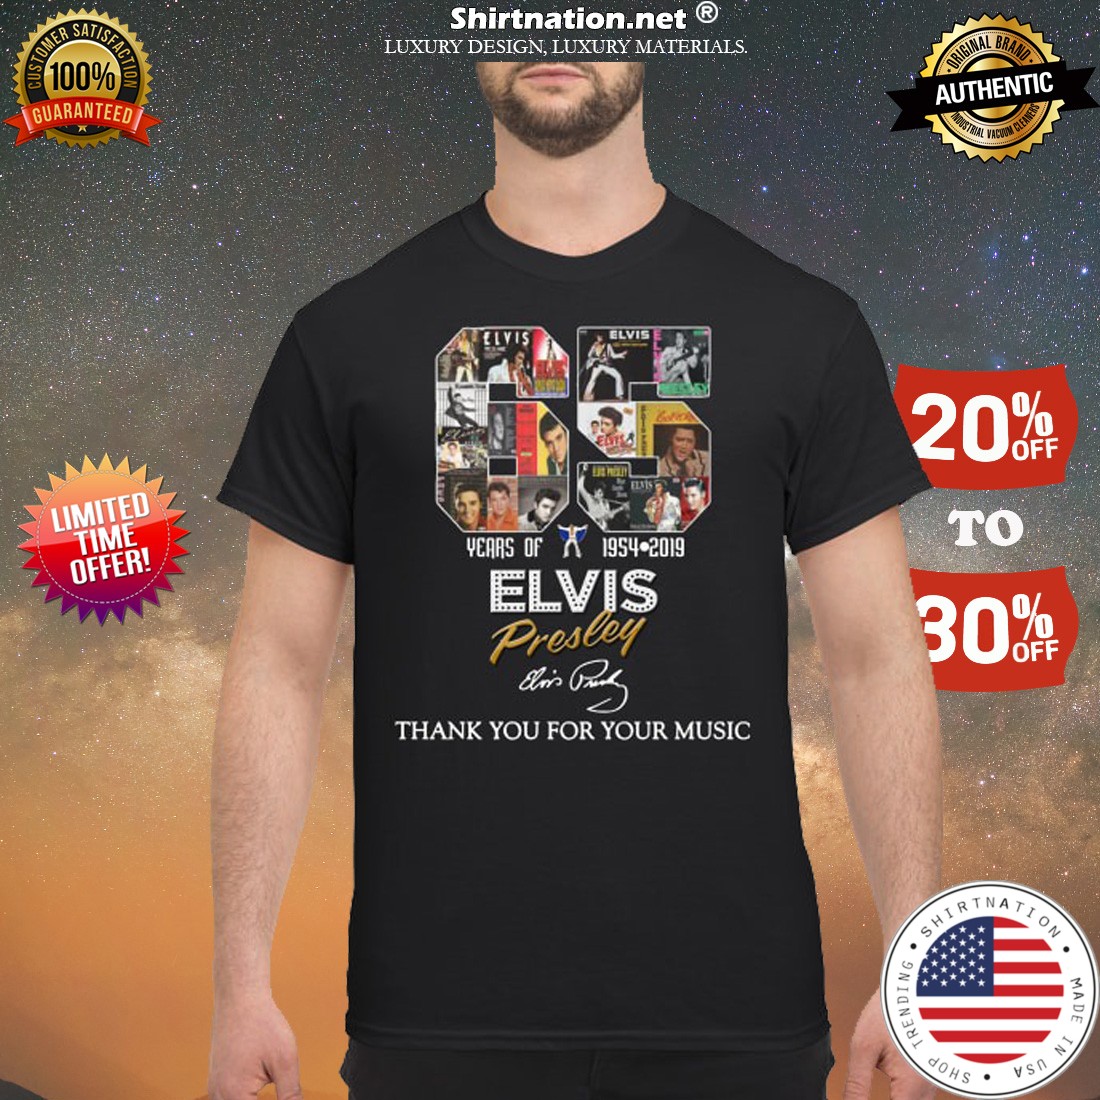 65 years of Elvis Presley thank you for your music shirt